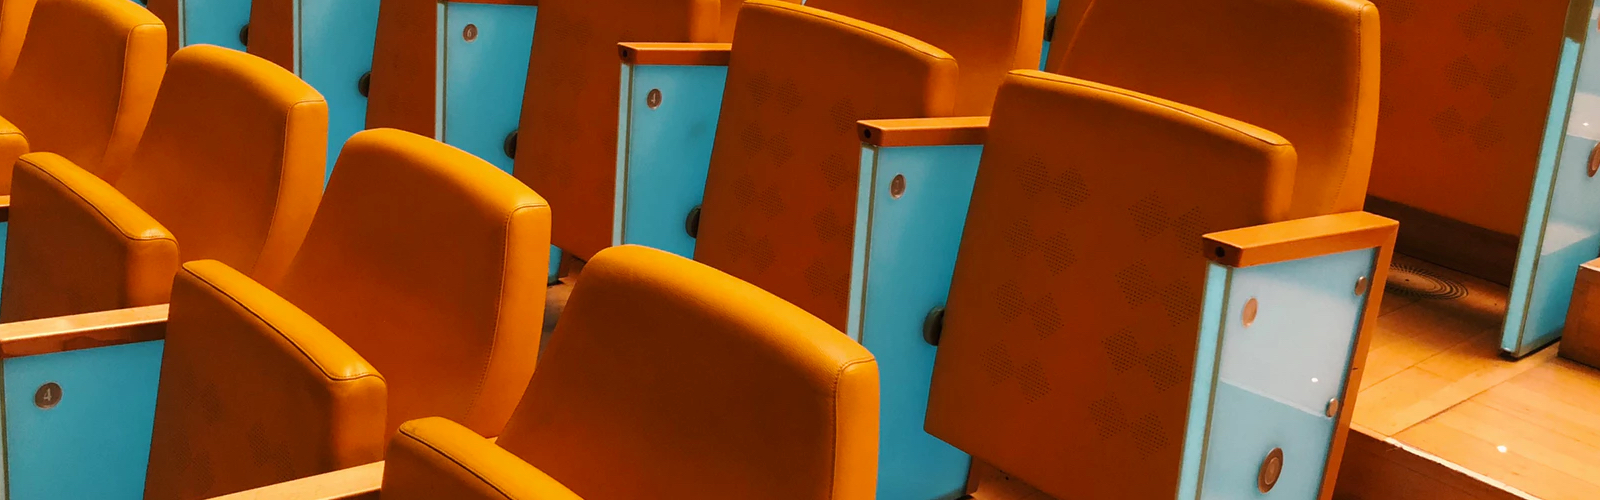 Empty seats in an arena or theatre